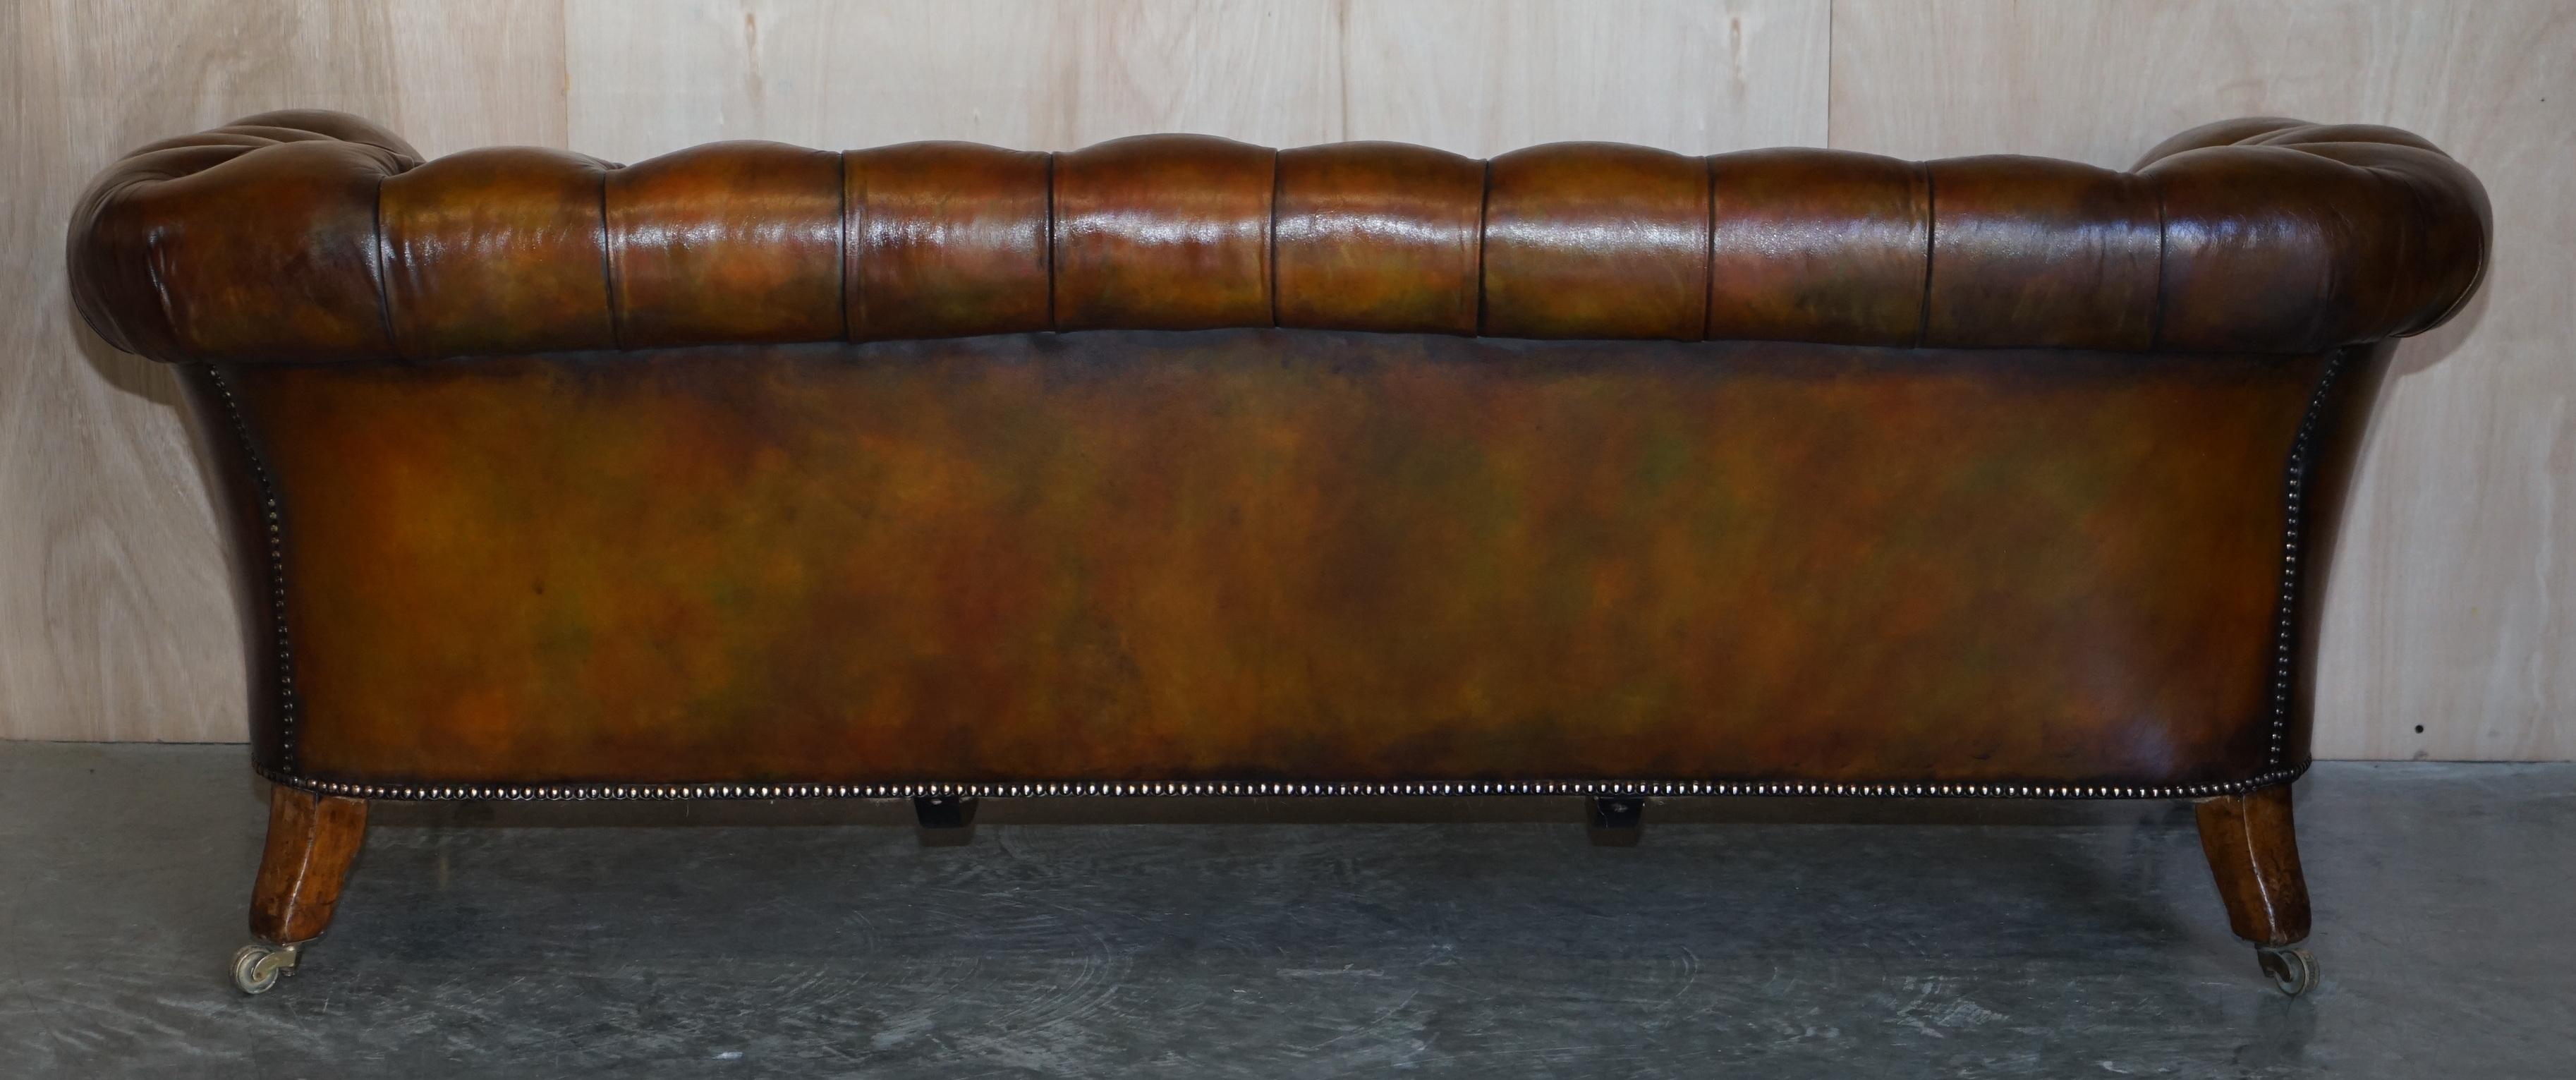 Fine Important Restored Pair of Antique Howard & Sons Leather Chesterfield Sofas For Sale 8